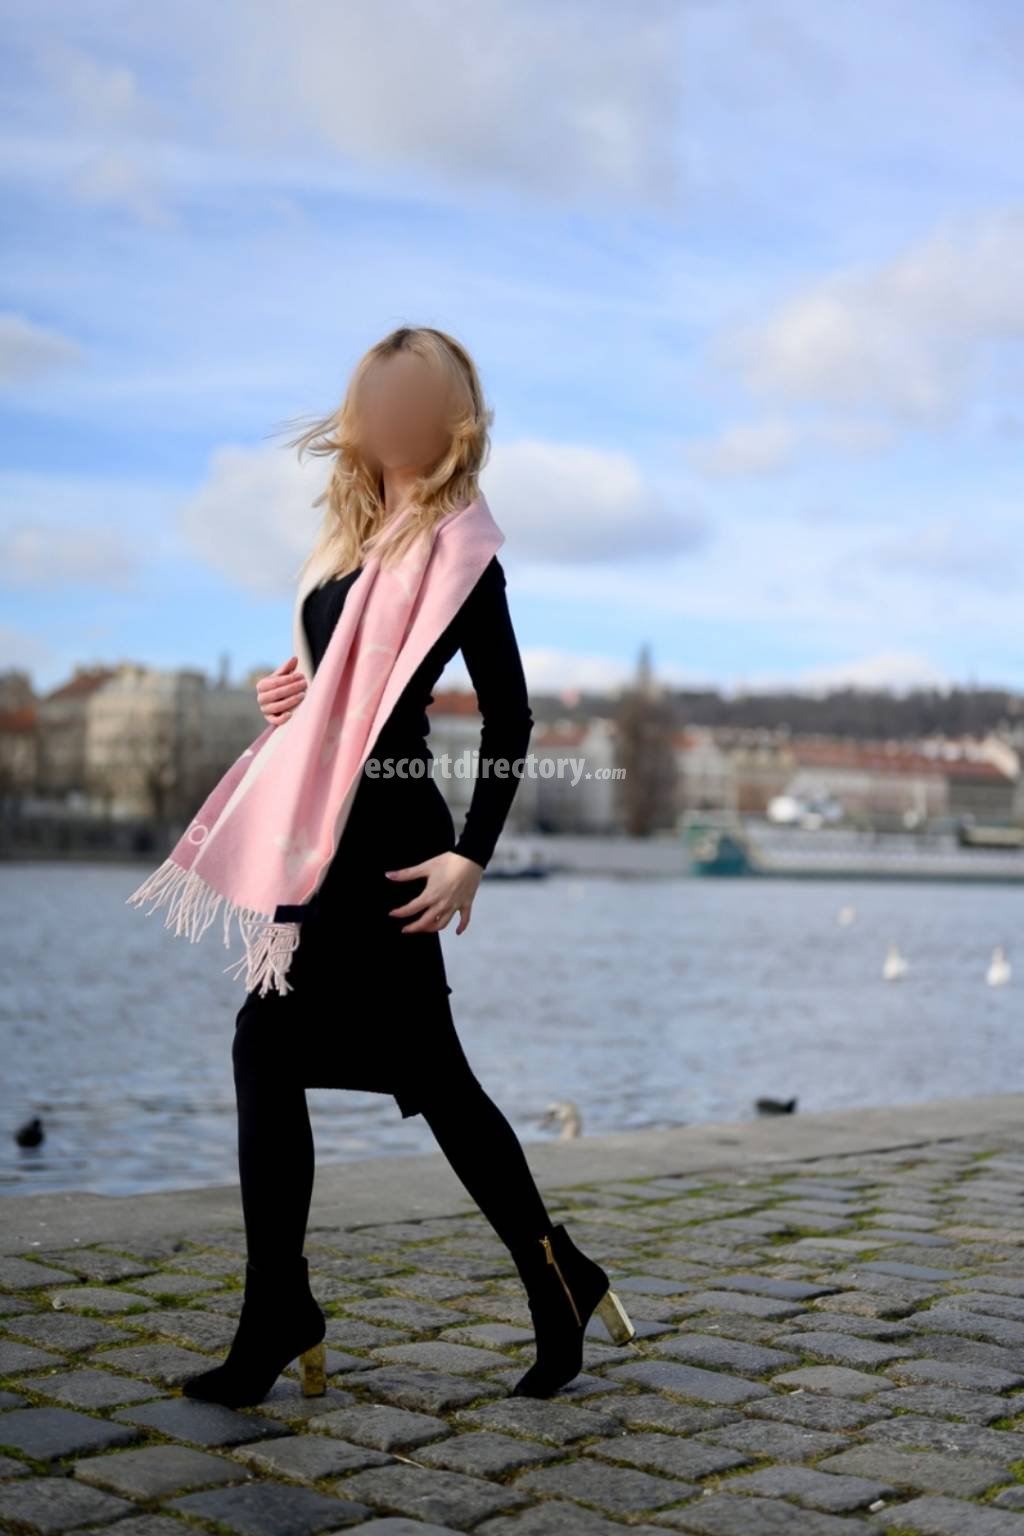 Venus escort in Prague offers French Kissing services